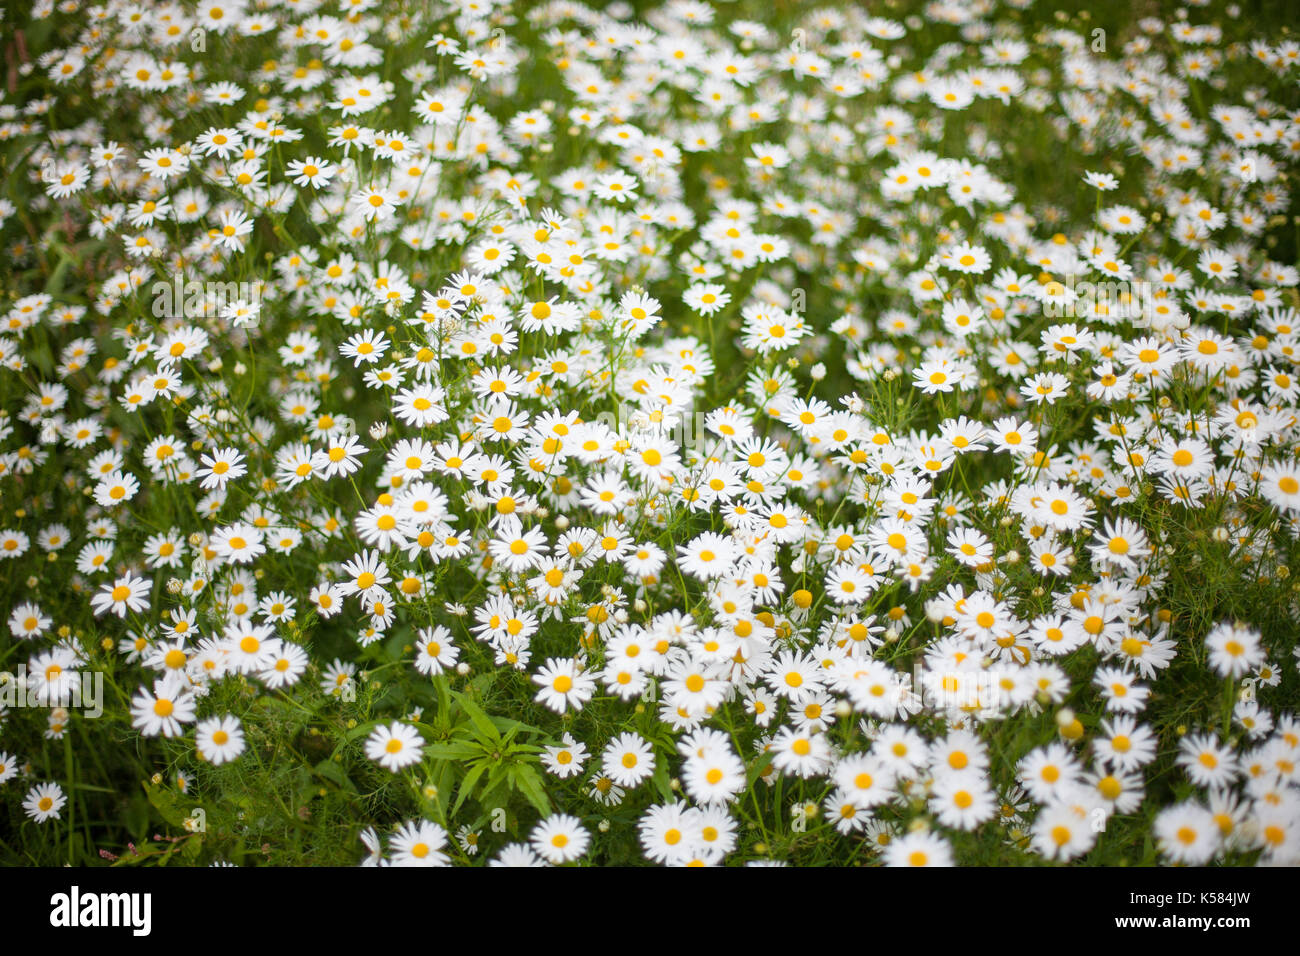 camomile or ox-eye daisy meadow top view Stock Photo